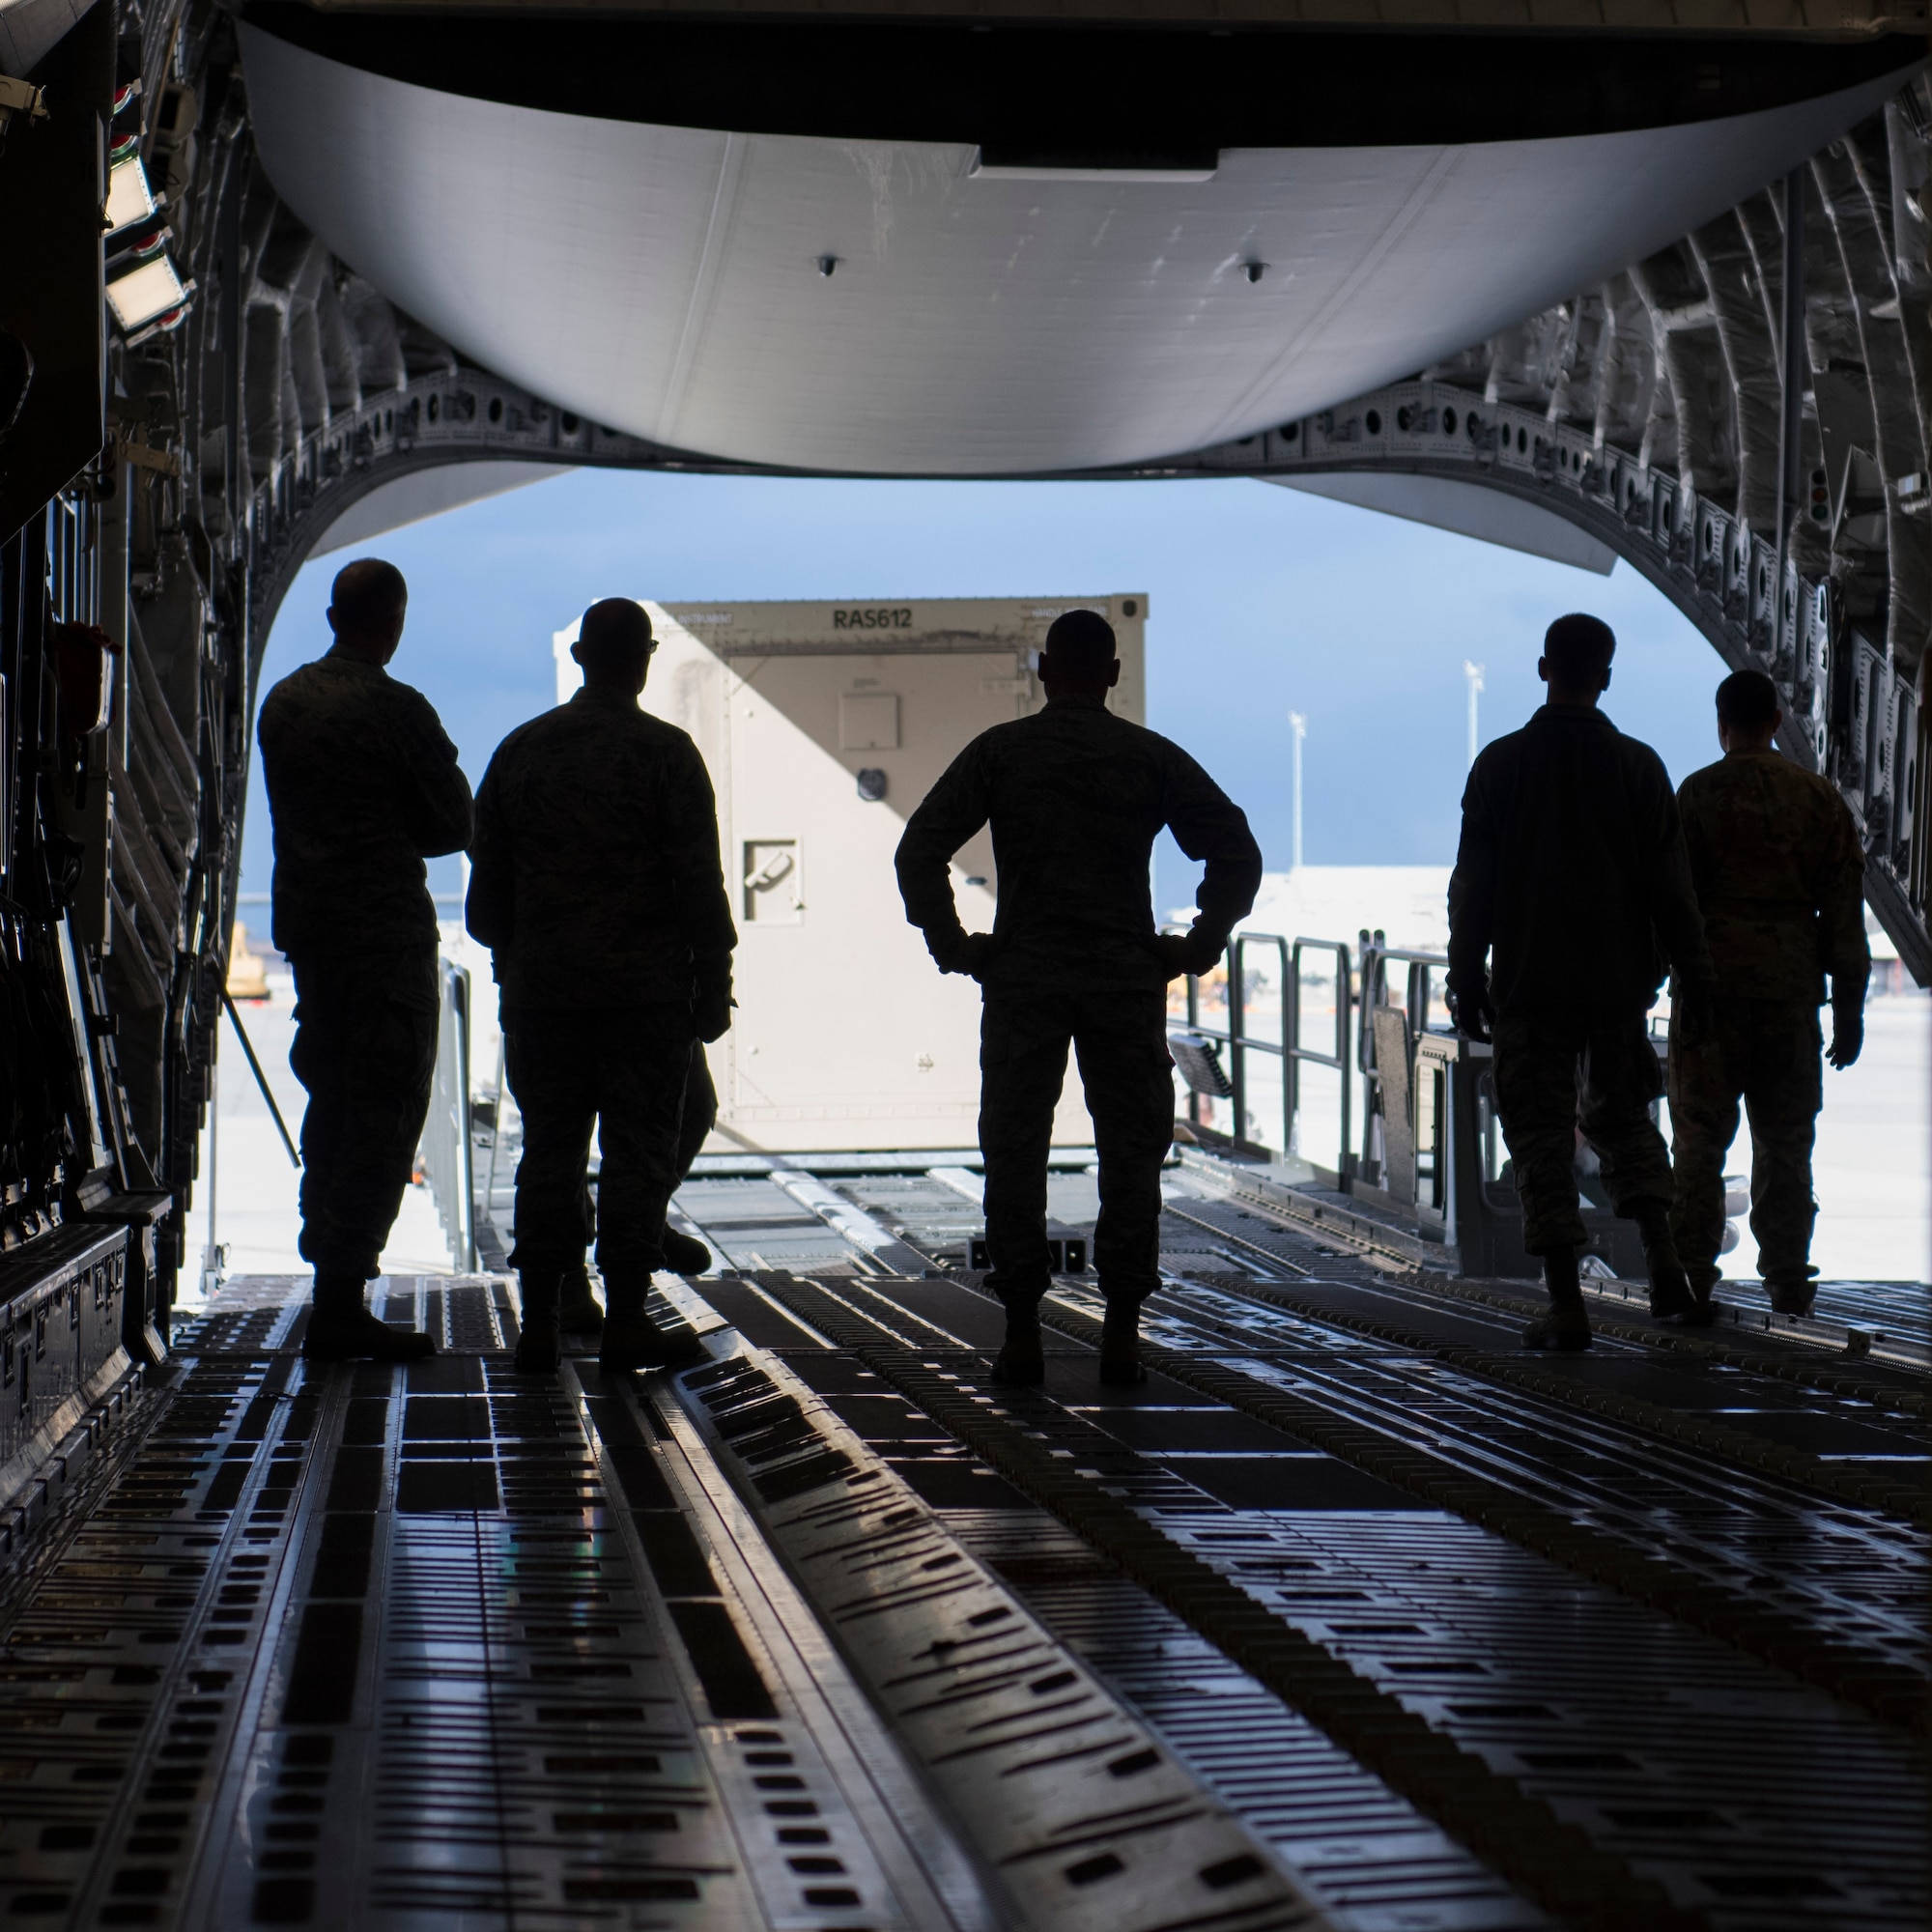 Airmen watch a Rapid Assistance Support for Calibration (RASCAL) load onto a C-17 Globemaster III Jan. 17, 2019, at Mountain Home Air Force Base, Idaho. The RASCAL, which is one of two of its kind in the Air Force, is deploying for the first time in 10 years. (U.S. Air Force photo by Airman First Class Andrew Kobialka)